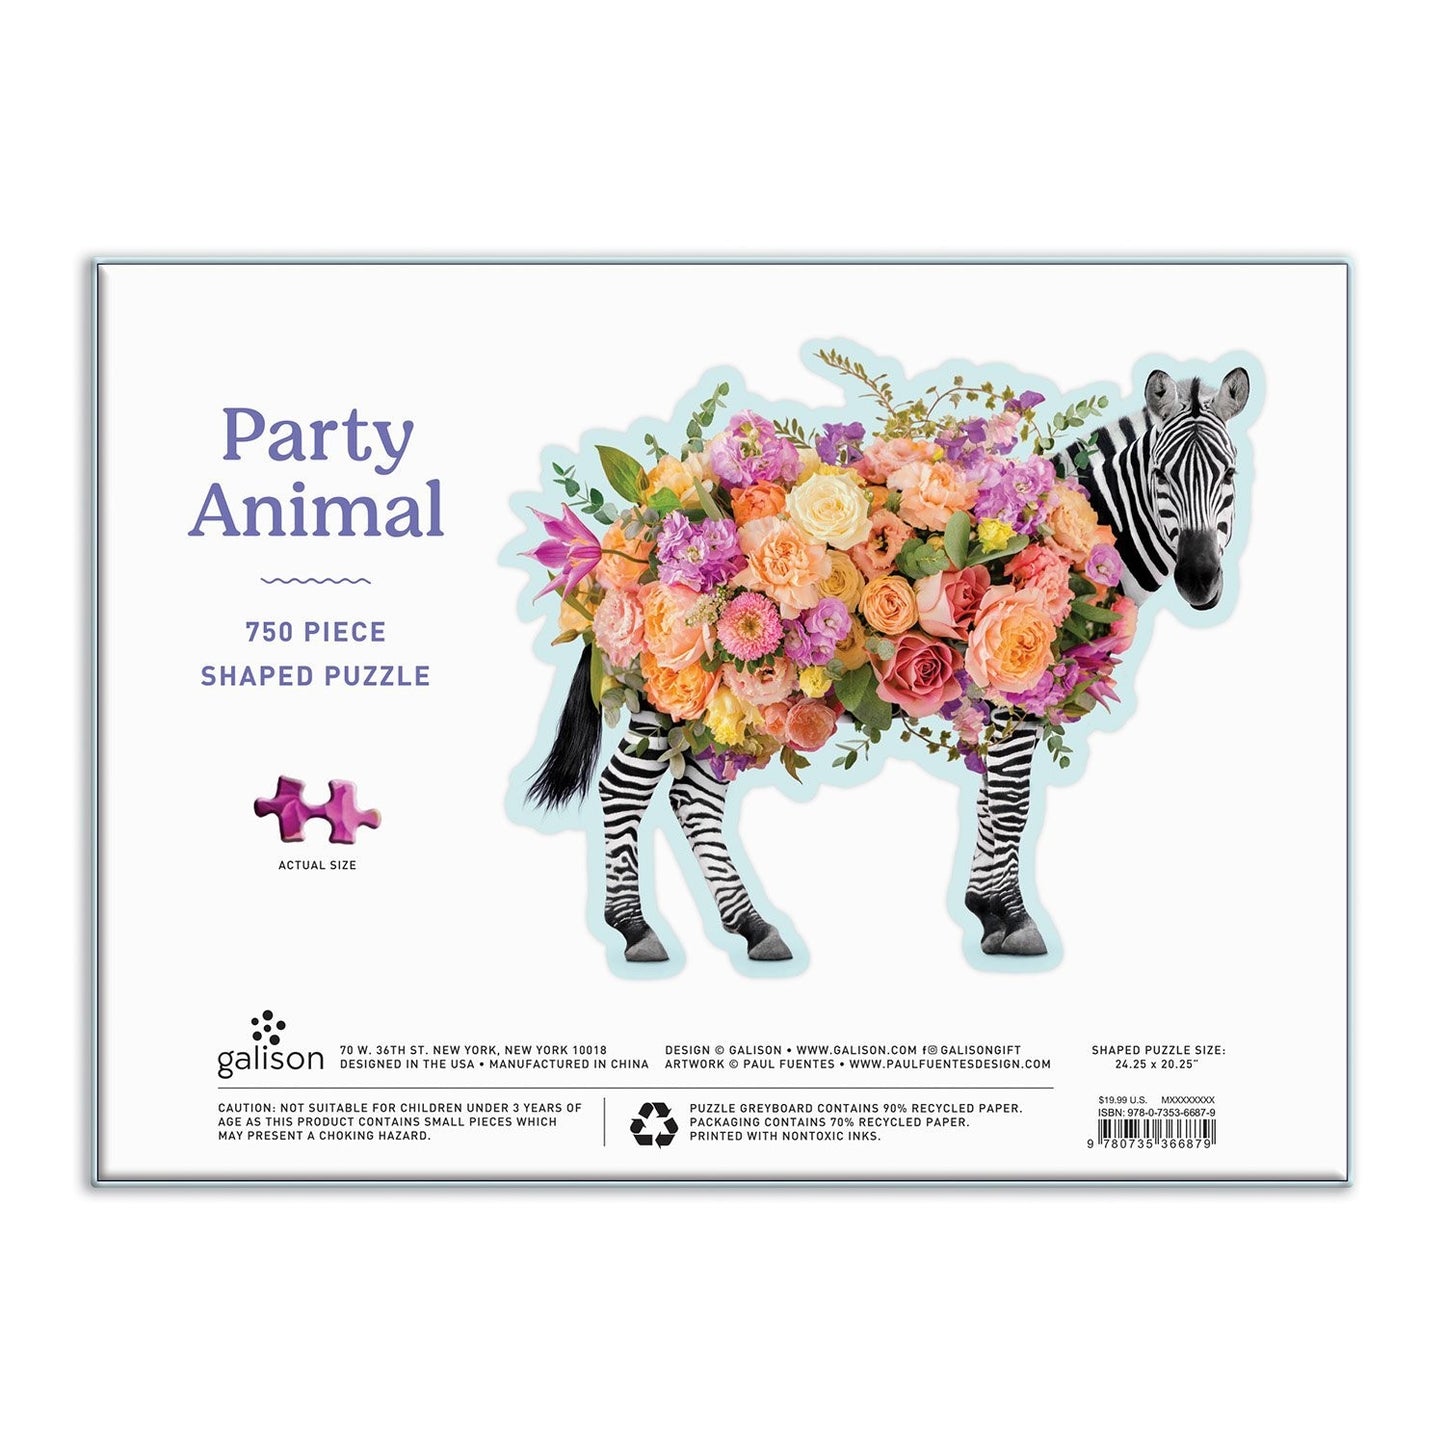 Party Animal 750 Piece Shaped Jigsaw Puzzle